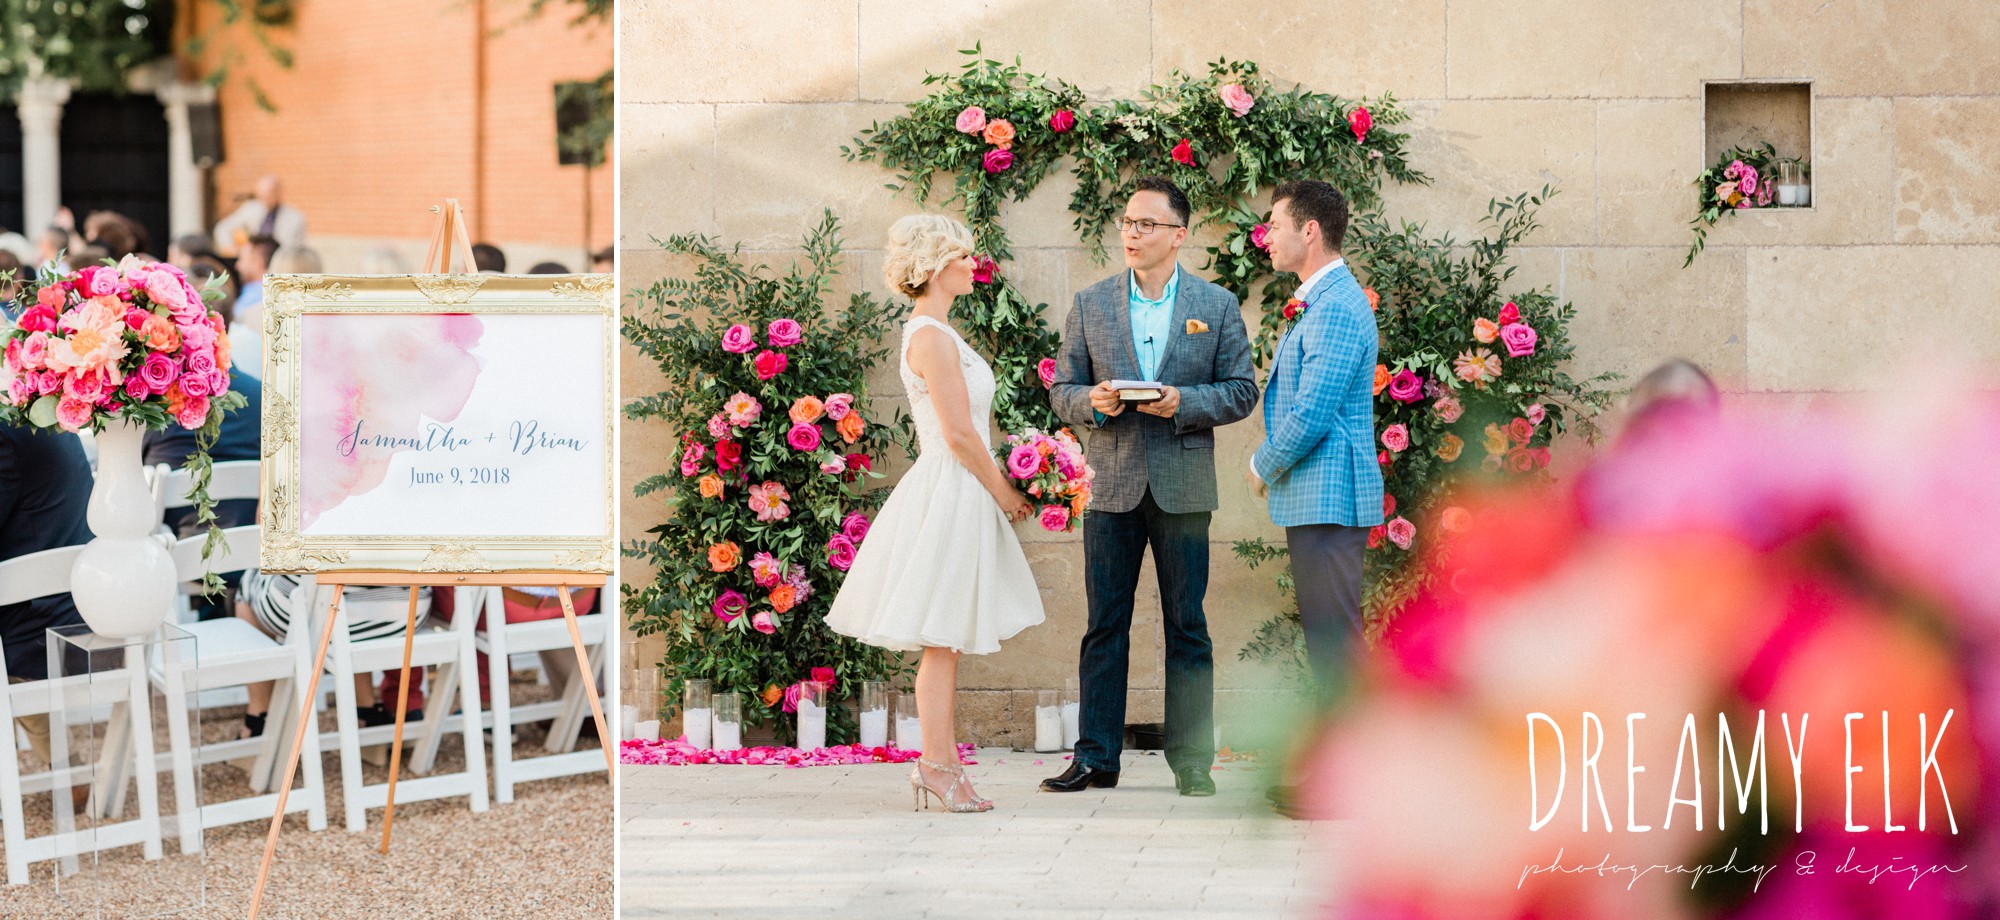 spring colorful pink orange wedding photo, fort worth, texas, dreamy elk photography and design, jen rios weddings, kate foley designs